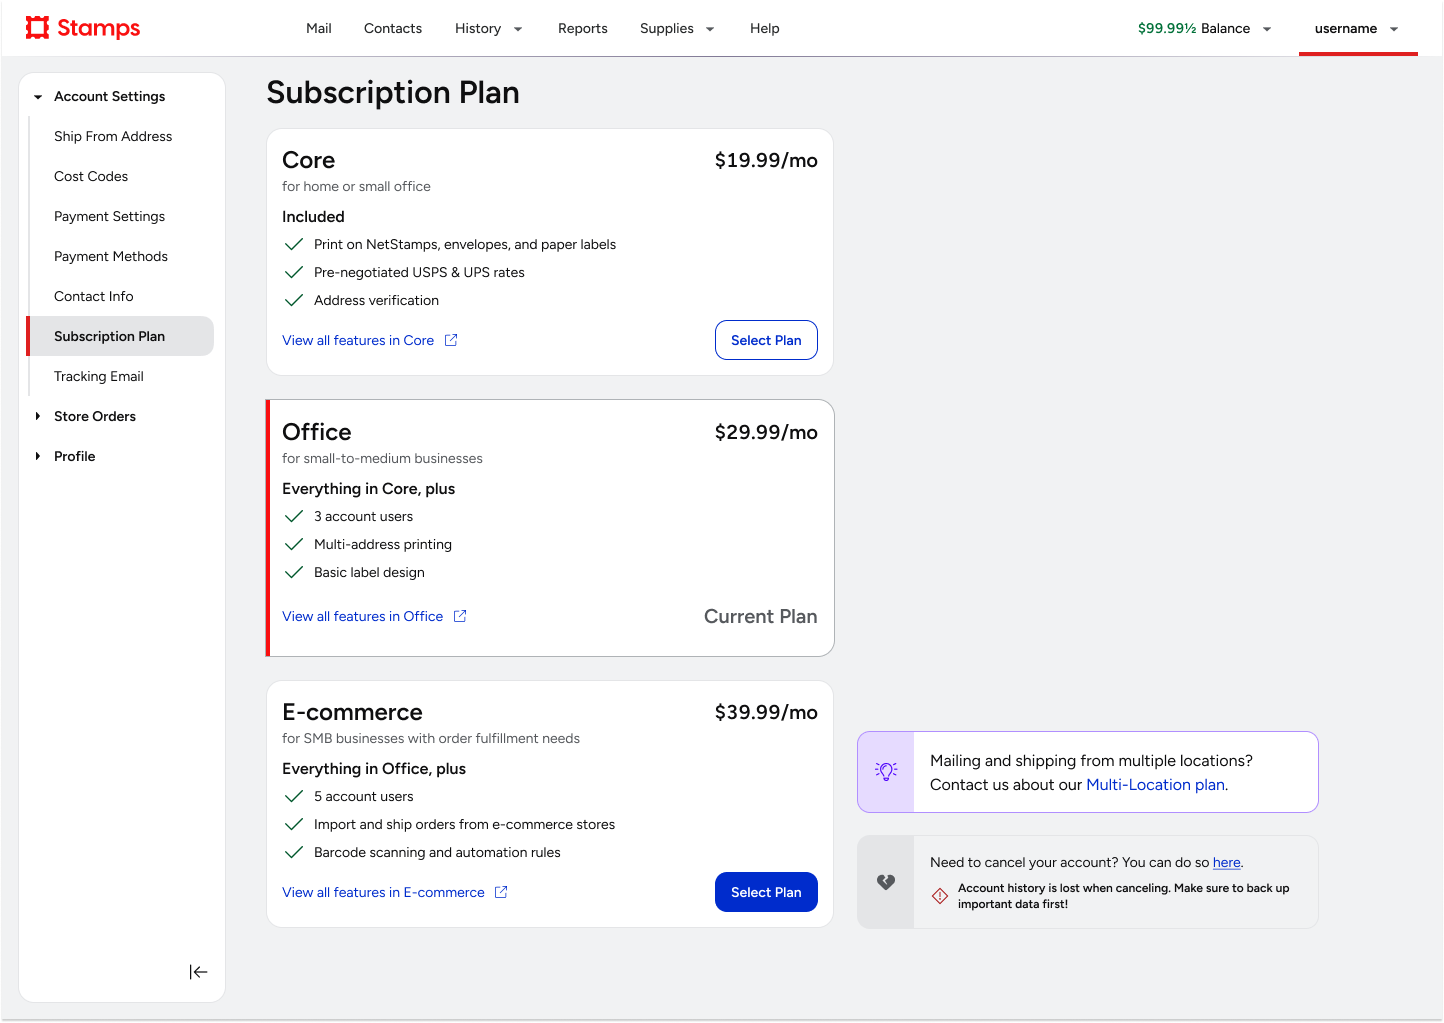 Rebranded Stamps Subscription Plan page